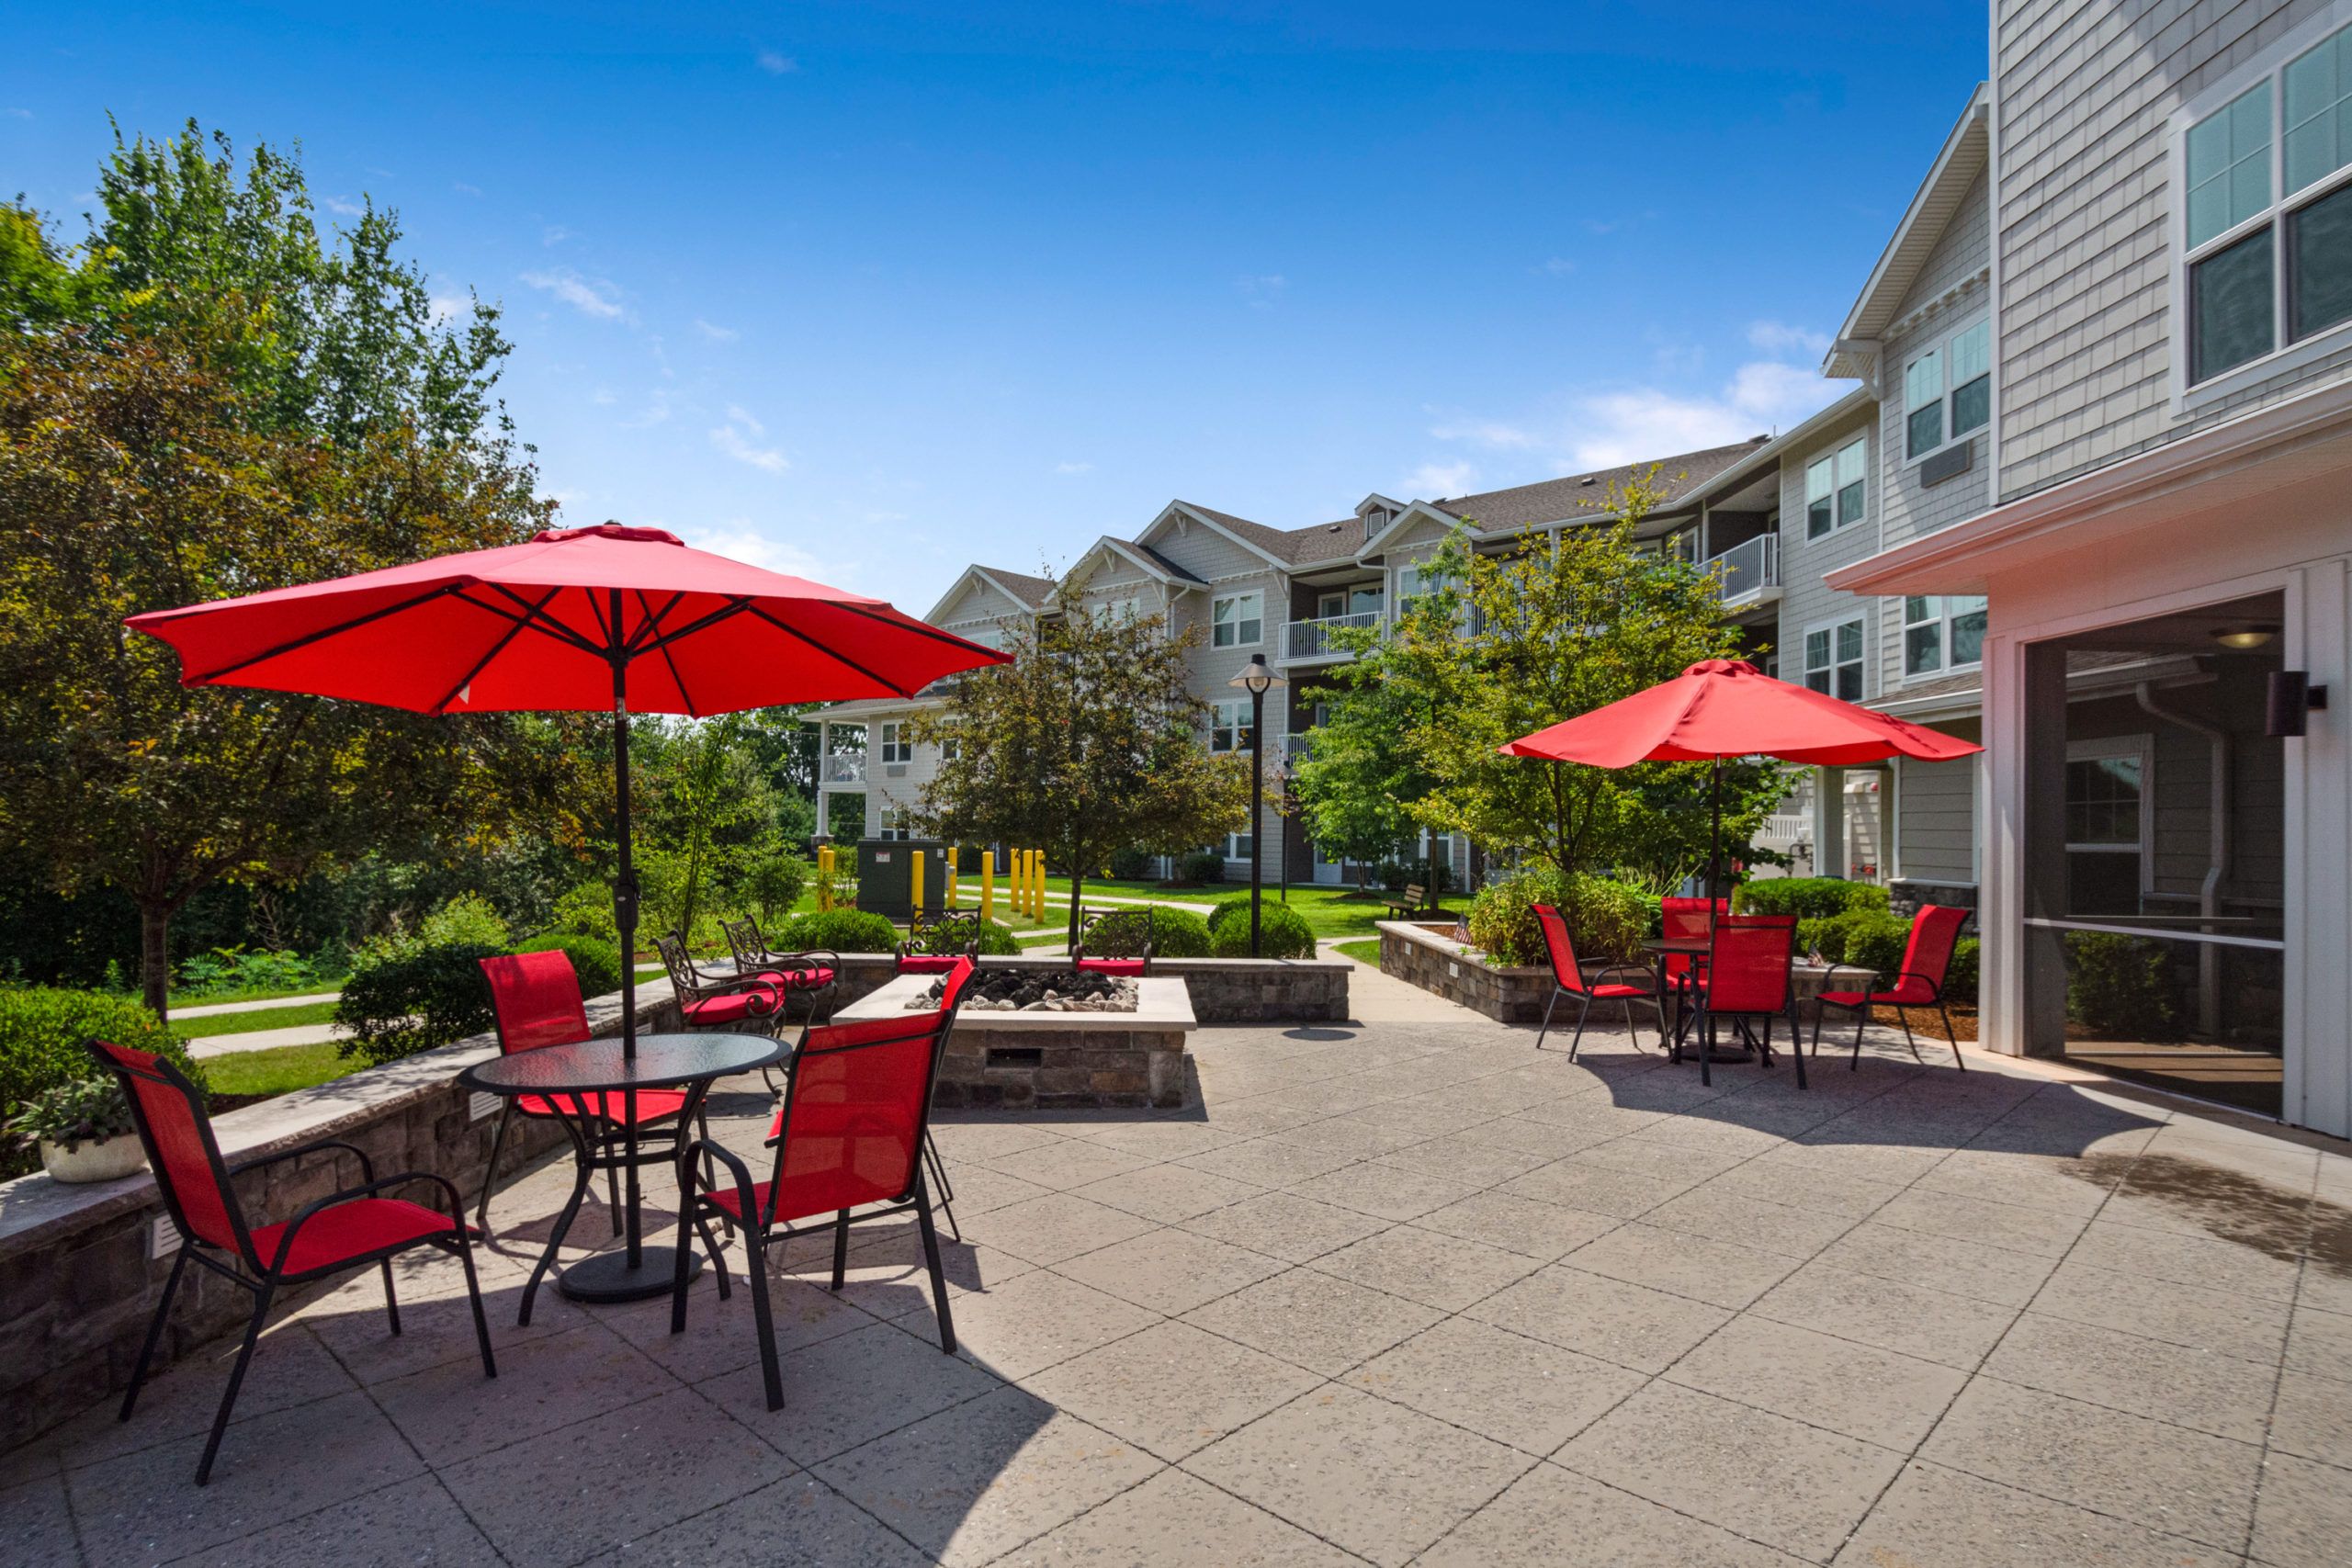 Senior living community, Magnolia Heights, featuring urban architecture, outdoor patio, and scenic walkway.